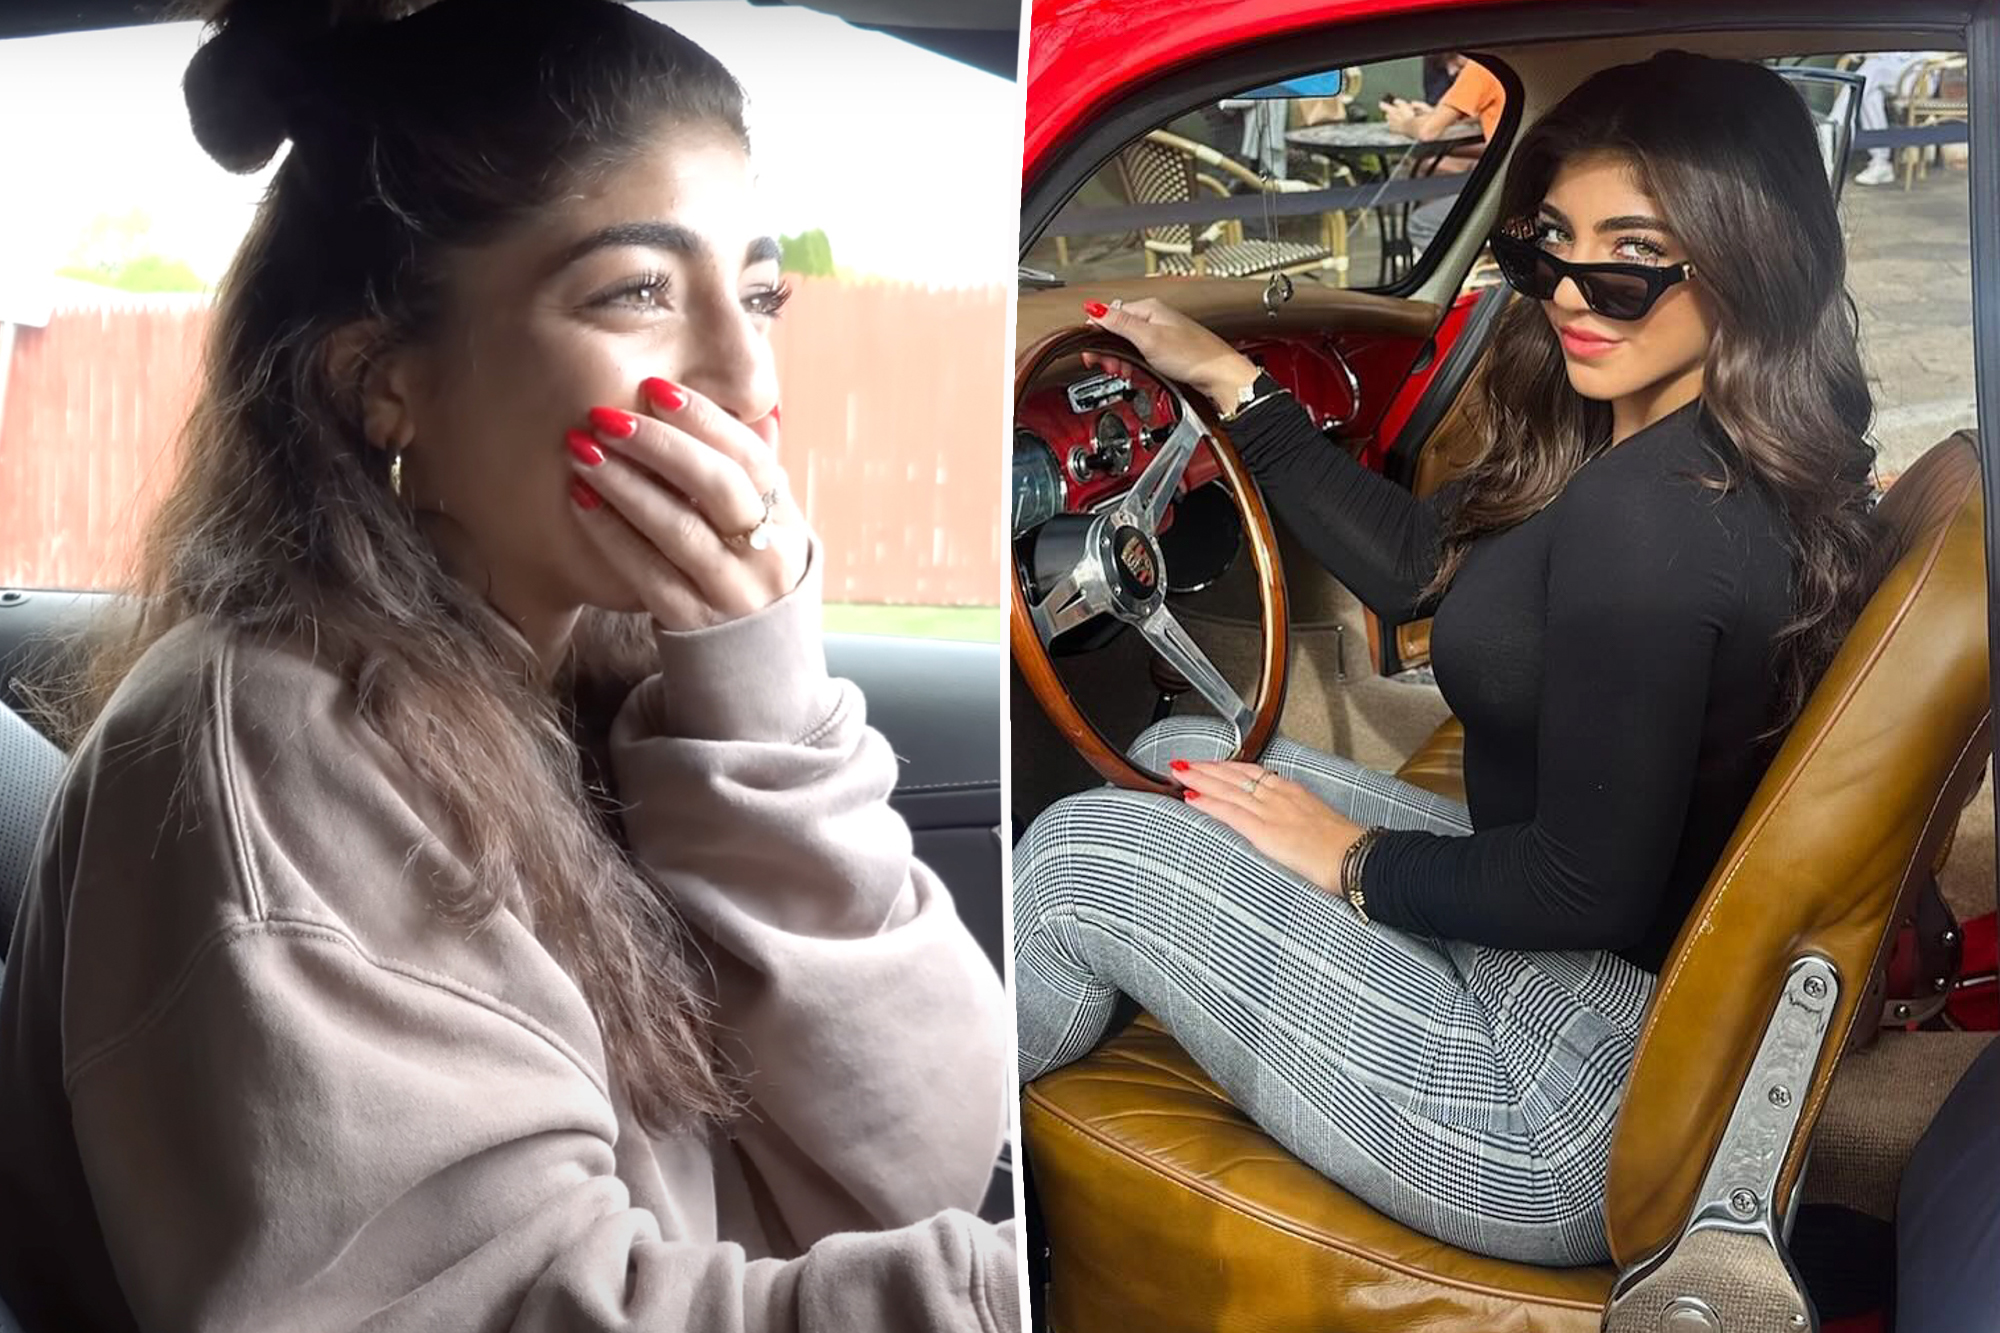 Teresa Giudice’s Daughter Milania Involved in Car Accident in New Mercedes Convertible